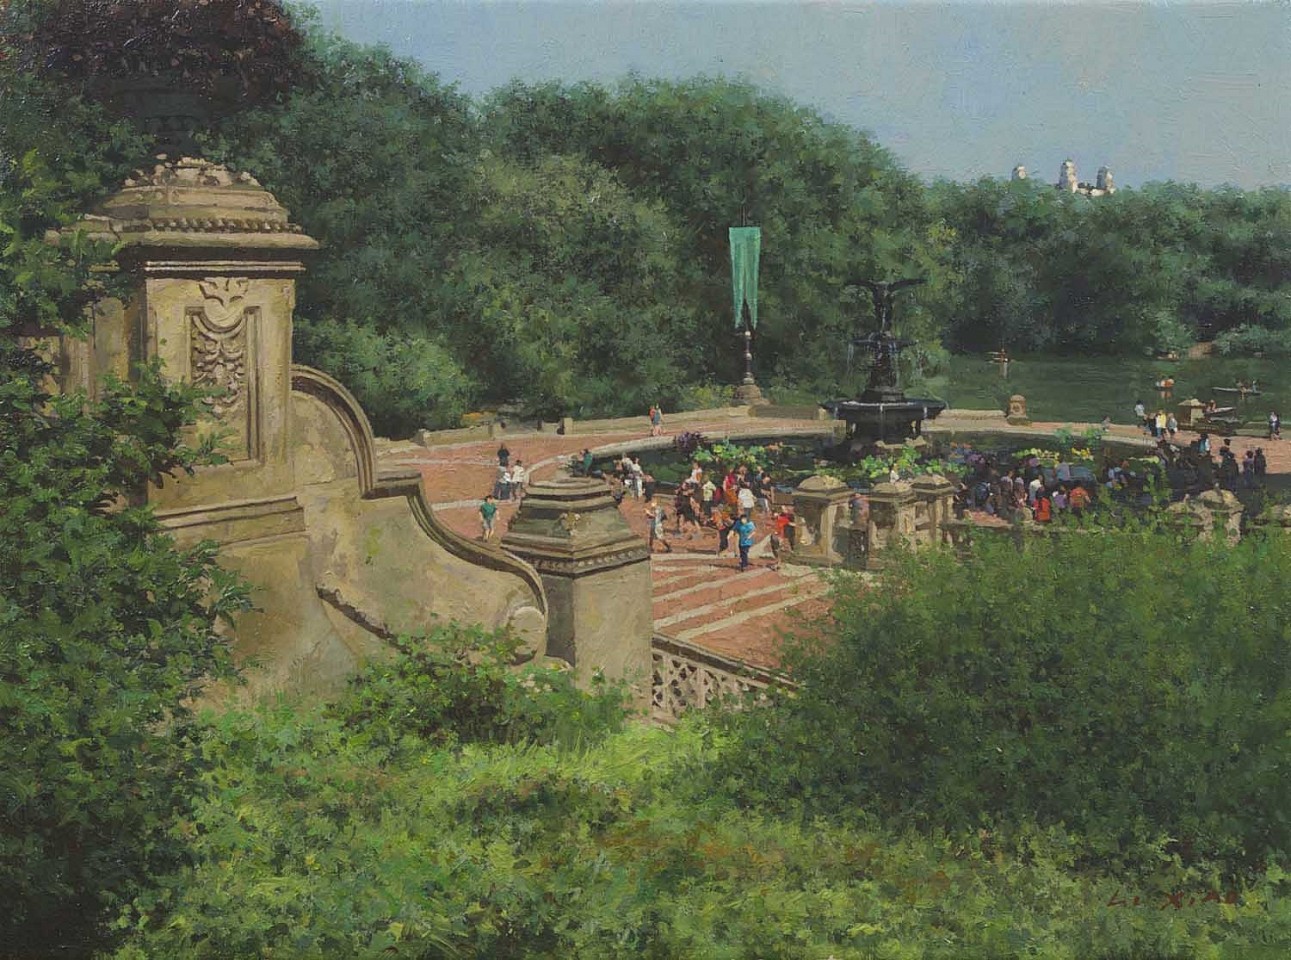 Li Xiao, Summer at Bethesda Fountain, 2015
oil on canvas, 12 x 16 in. (30.5 x 40.6 cm)
LX151001